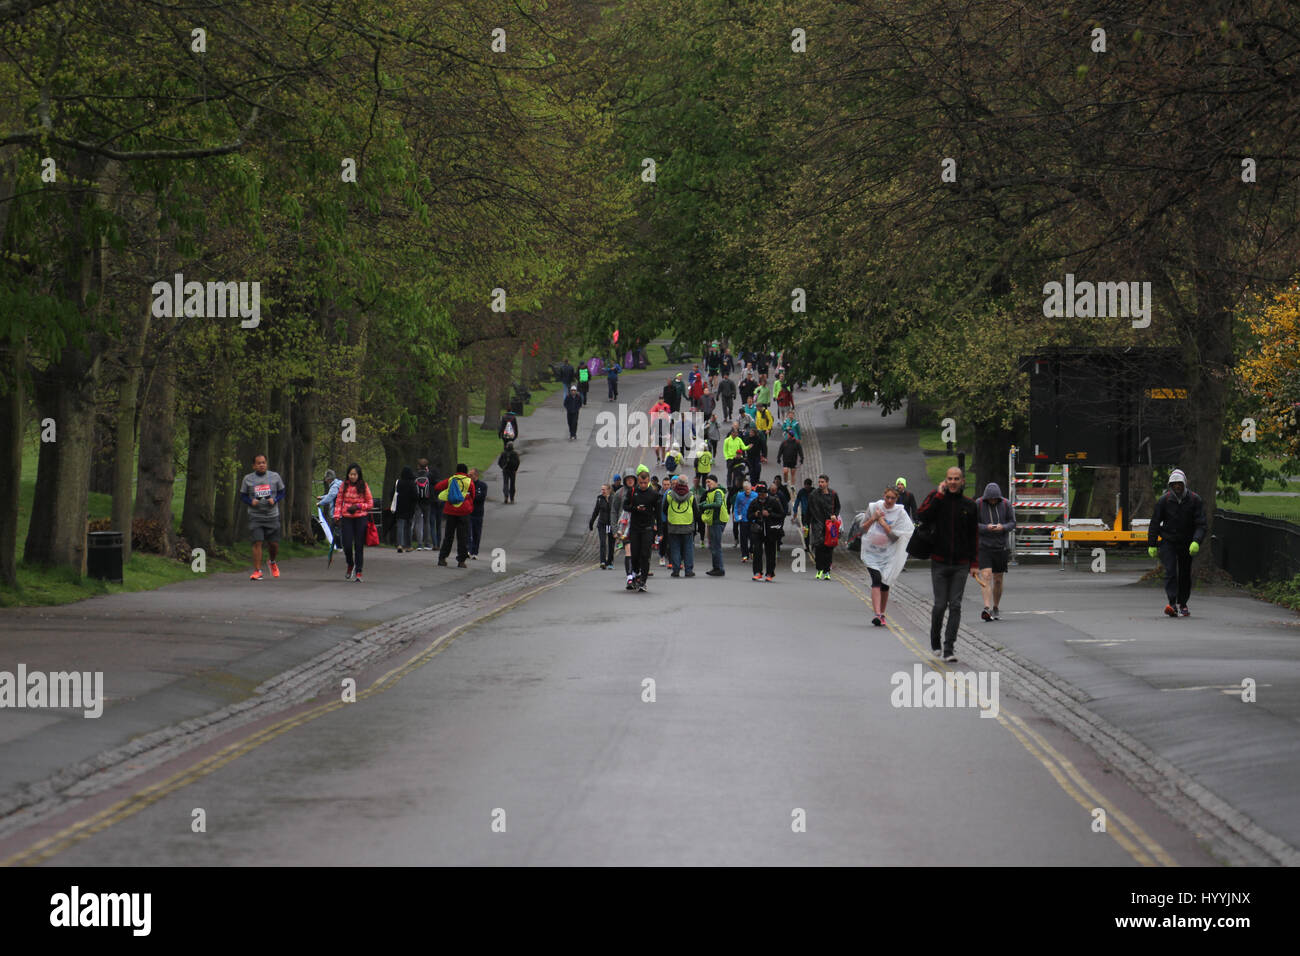 London, UK 24 April 2016. Runners prepare for the annual Virgin Money London Marathon at Blackheath on 24th April 2016. Three quarters of all London Marathon competitors run for a charity, the NSPCC being the Official charity of the 2016 marathon.Approximately 38,000 runners are expected to start the run, with the London Marathon’s one millionth finisher crosing the line during this years race, a milestone in the history of the race that started in 1981. © David Mbiyu/Alamy Live News Stock Photo